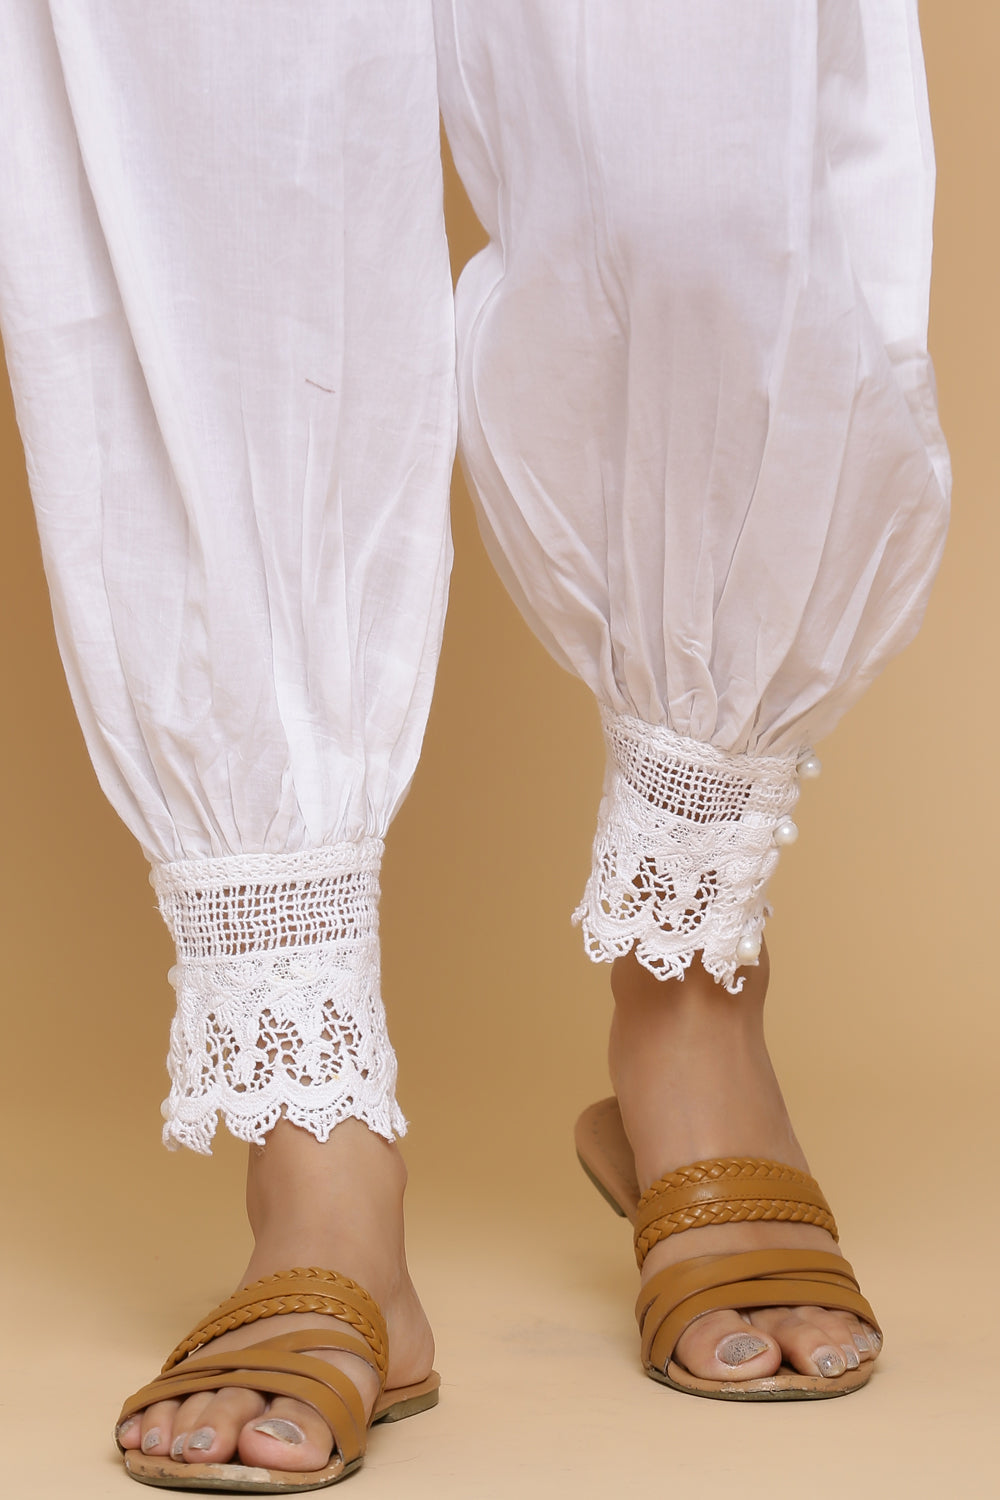 Buy Off White Lace Cotton Pants  ROZSAI003ROZ4  The loom